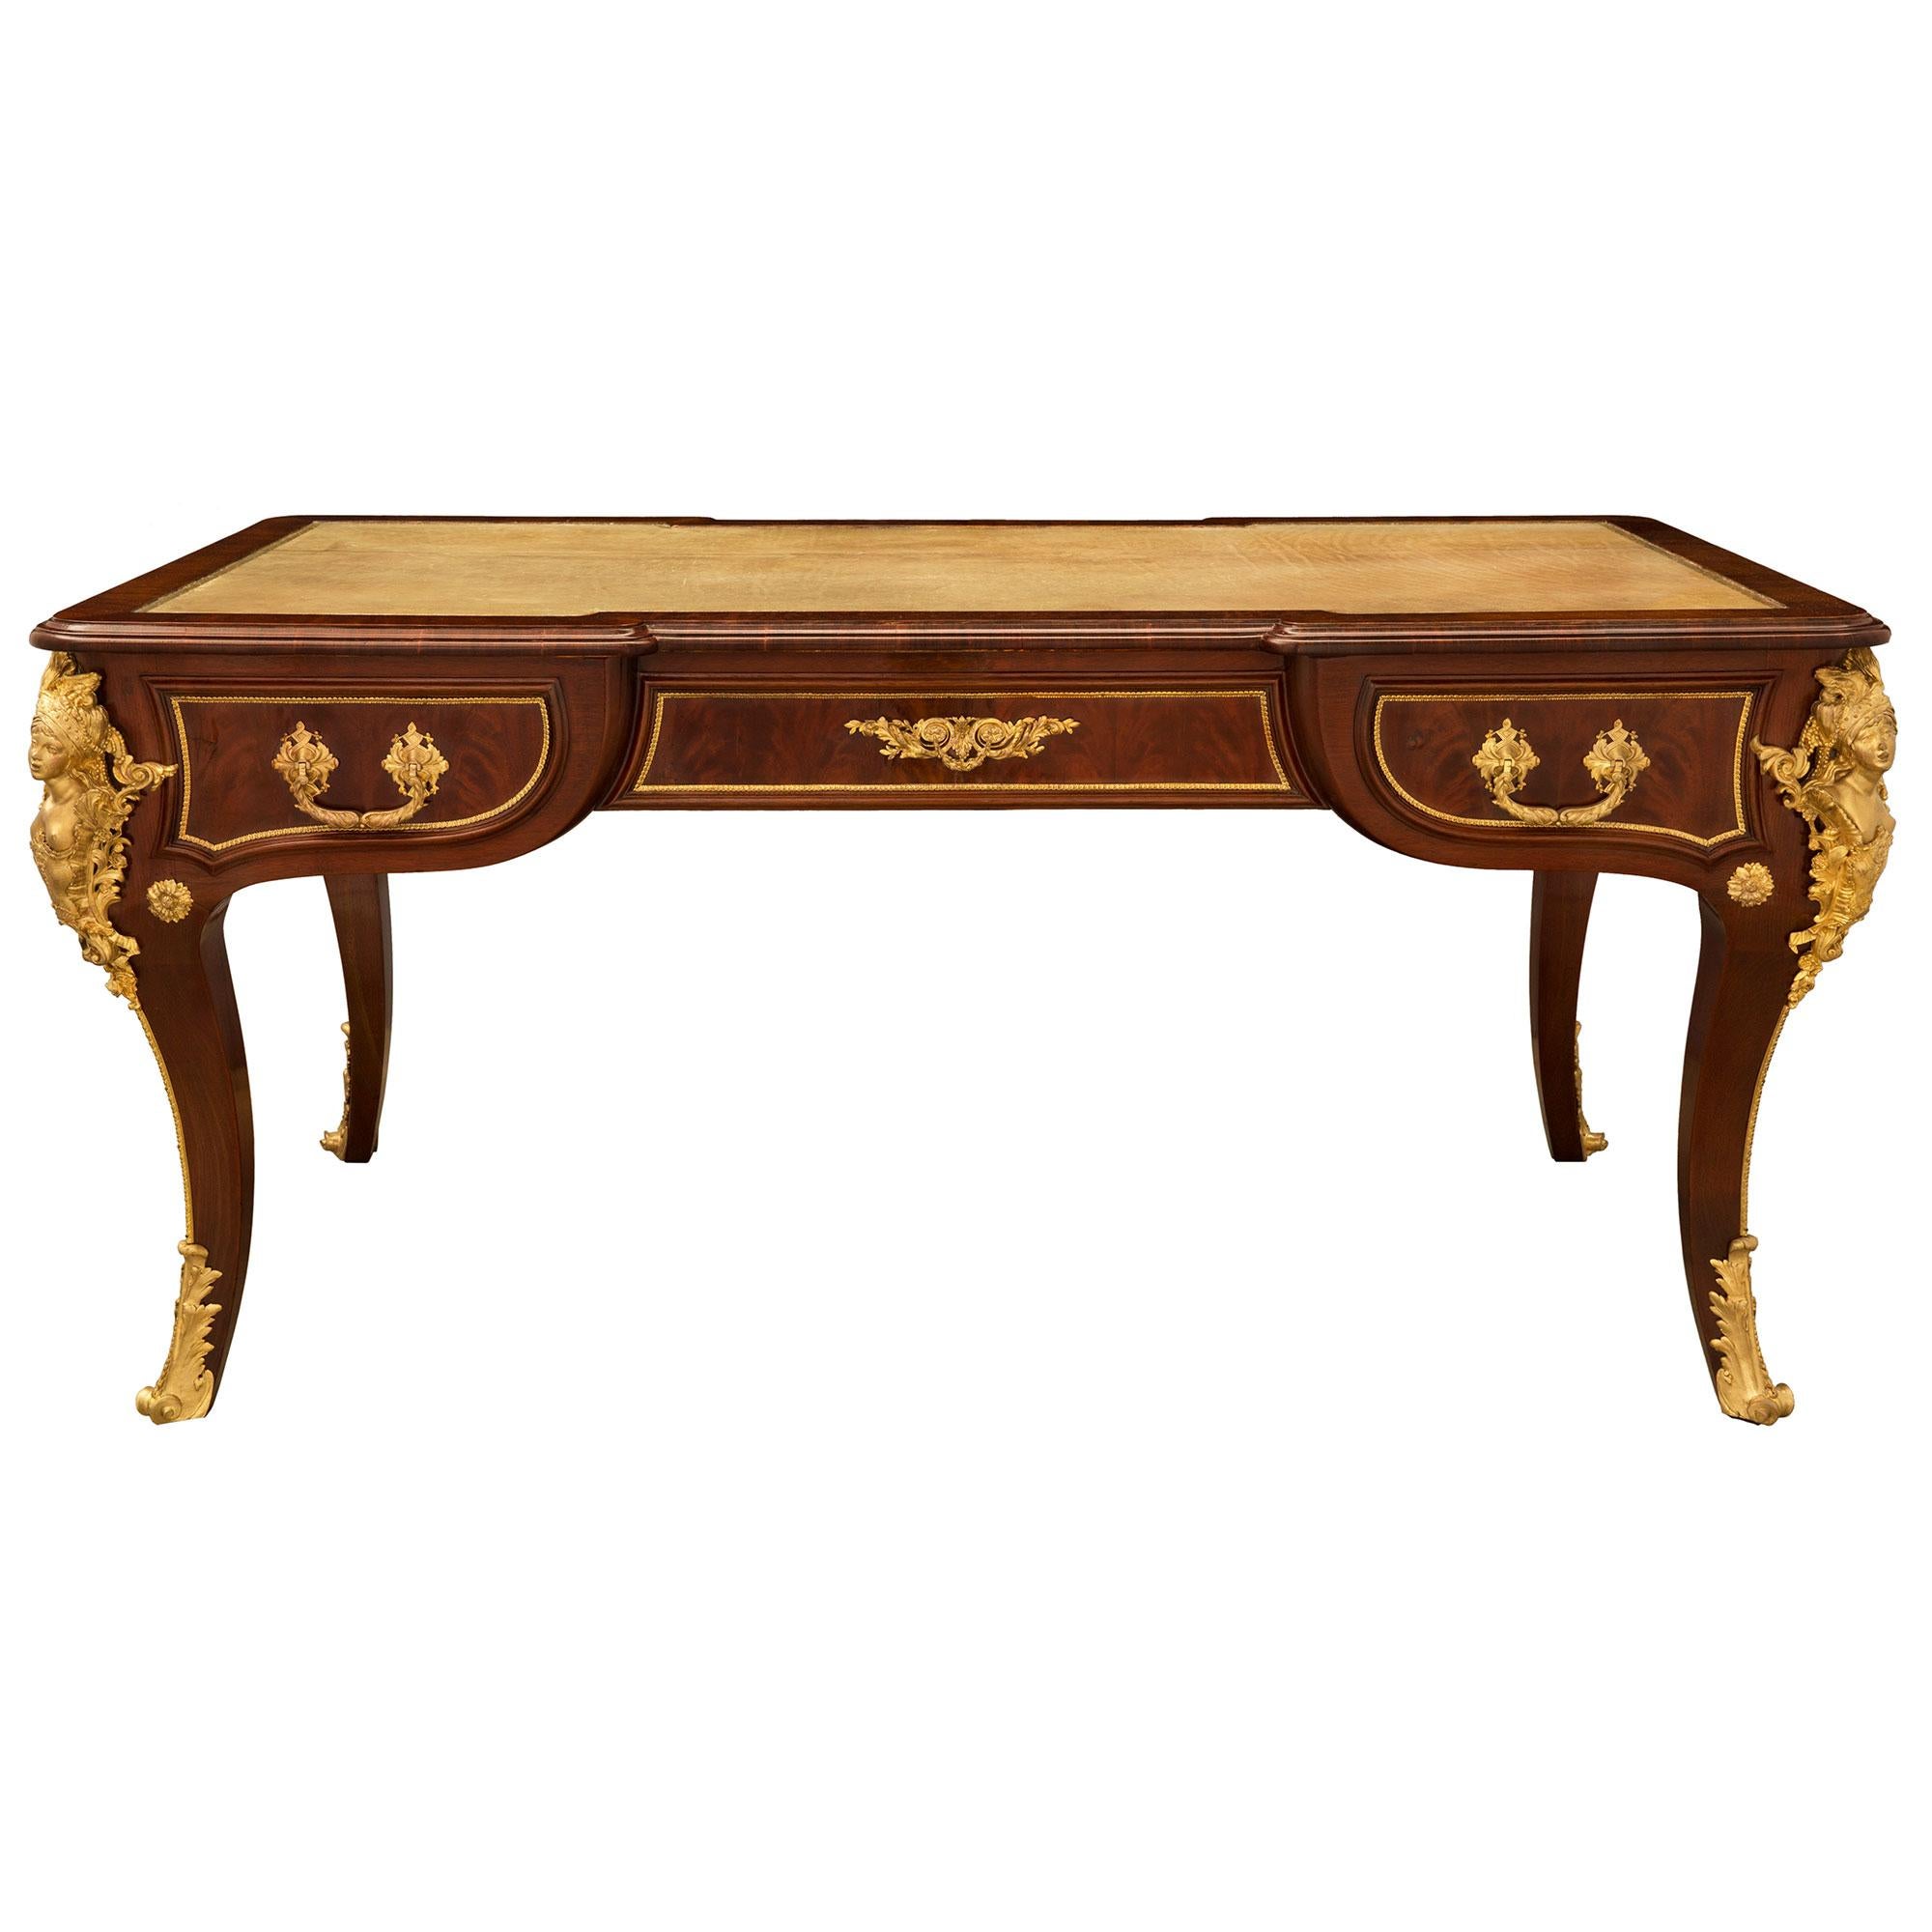 French 19th Century Louis XV Style Flamed Mahogany and Ormolu Bureau Plat Desk For Sale 2